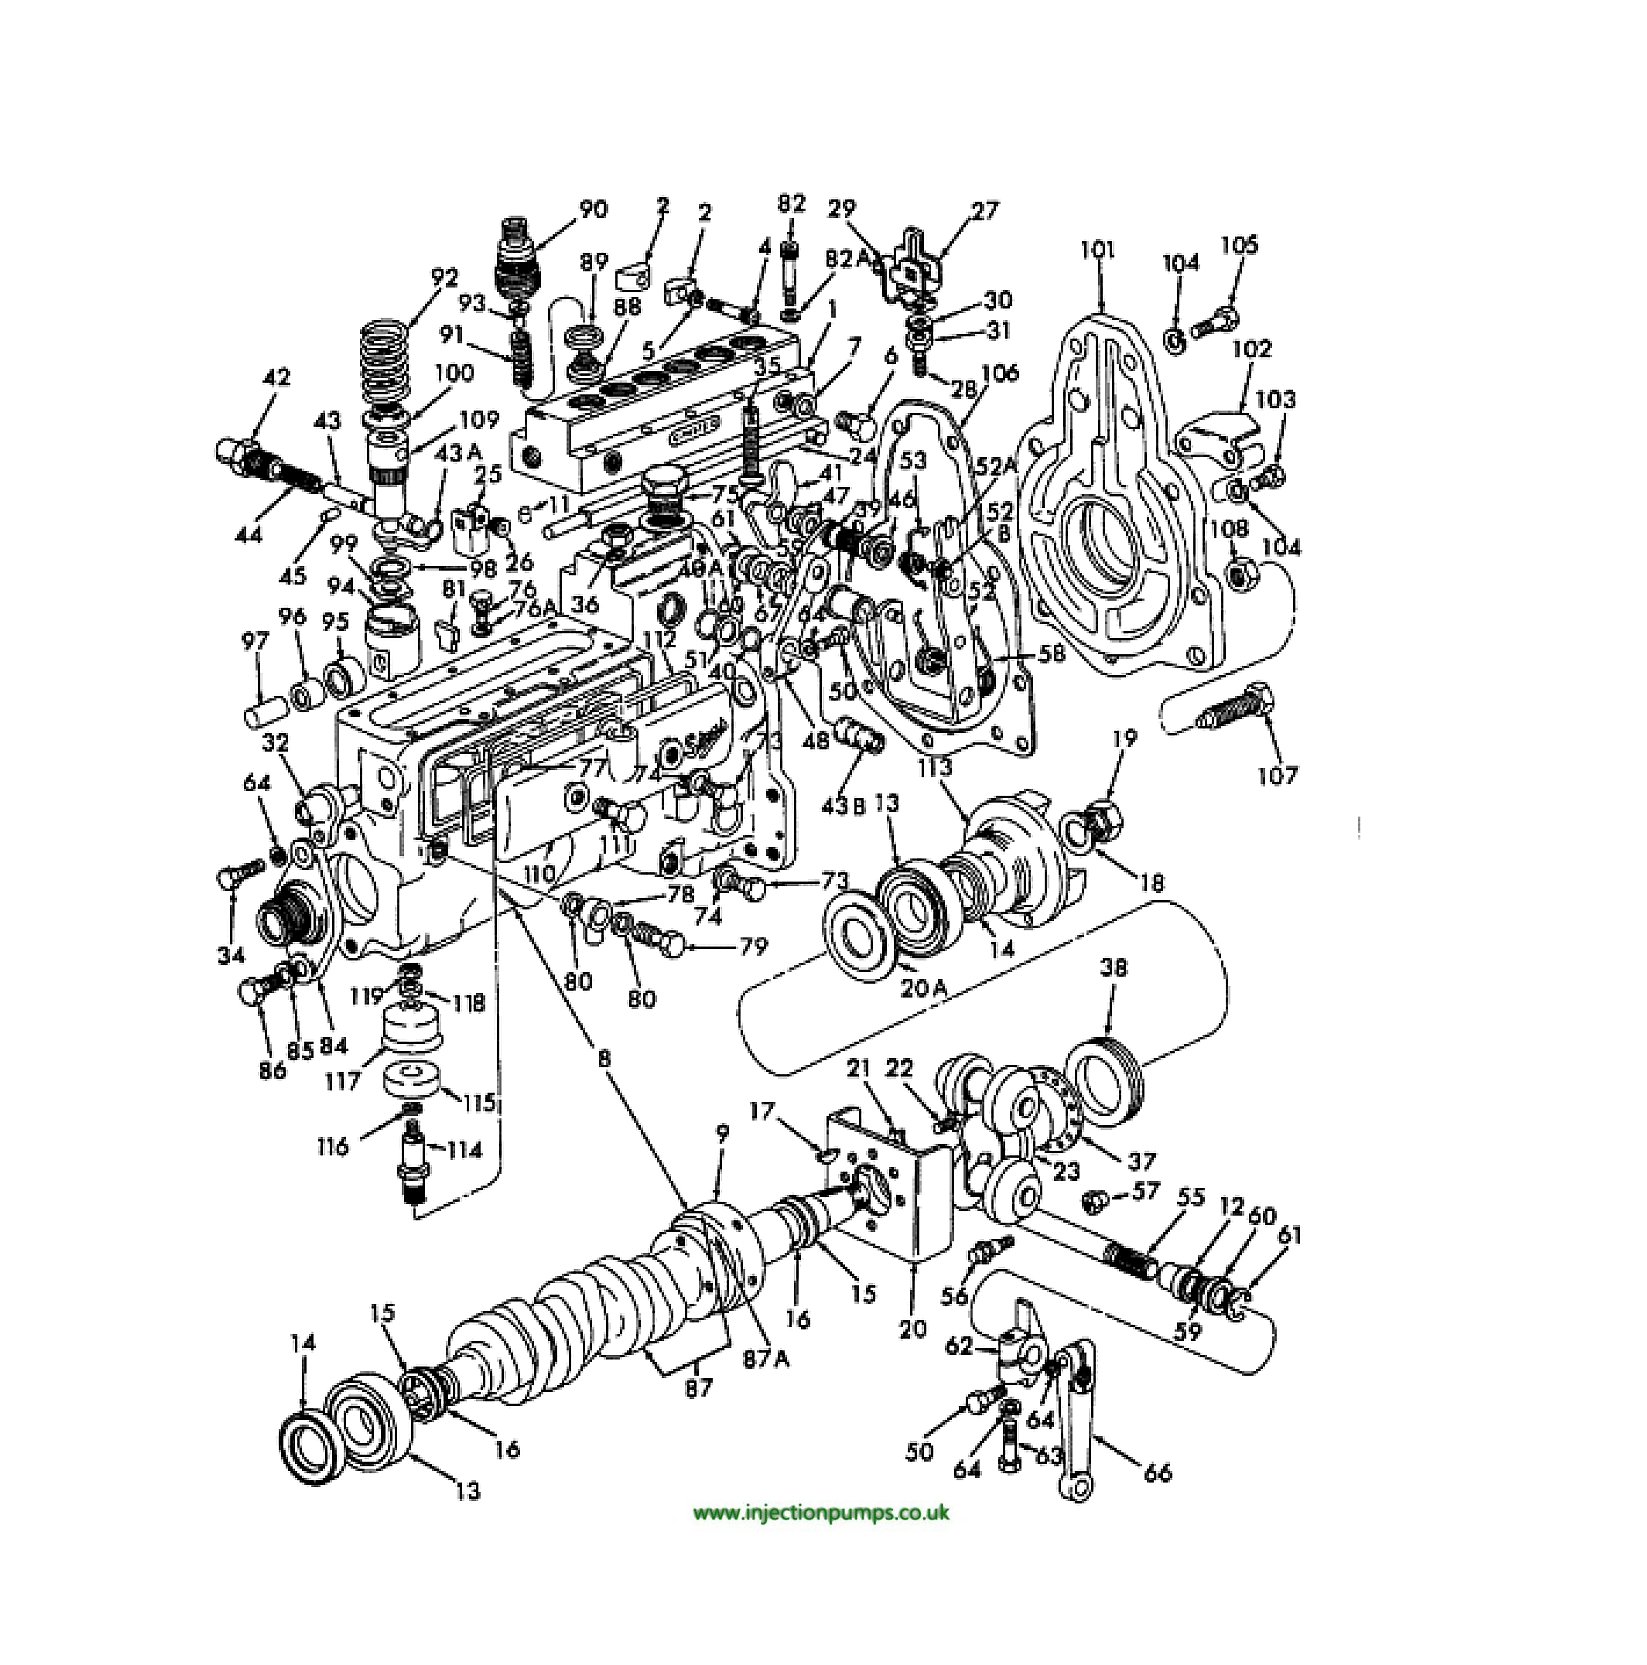 Exploded diagrams - Diesel Injection Pumps ford tractor injector pump diagram 